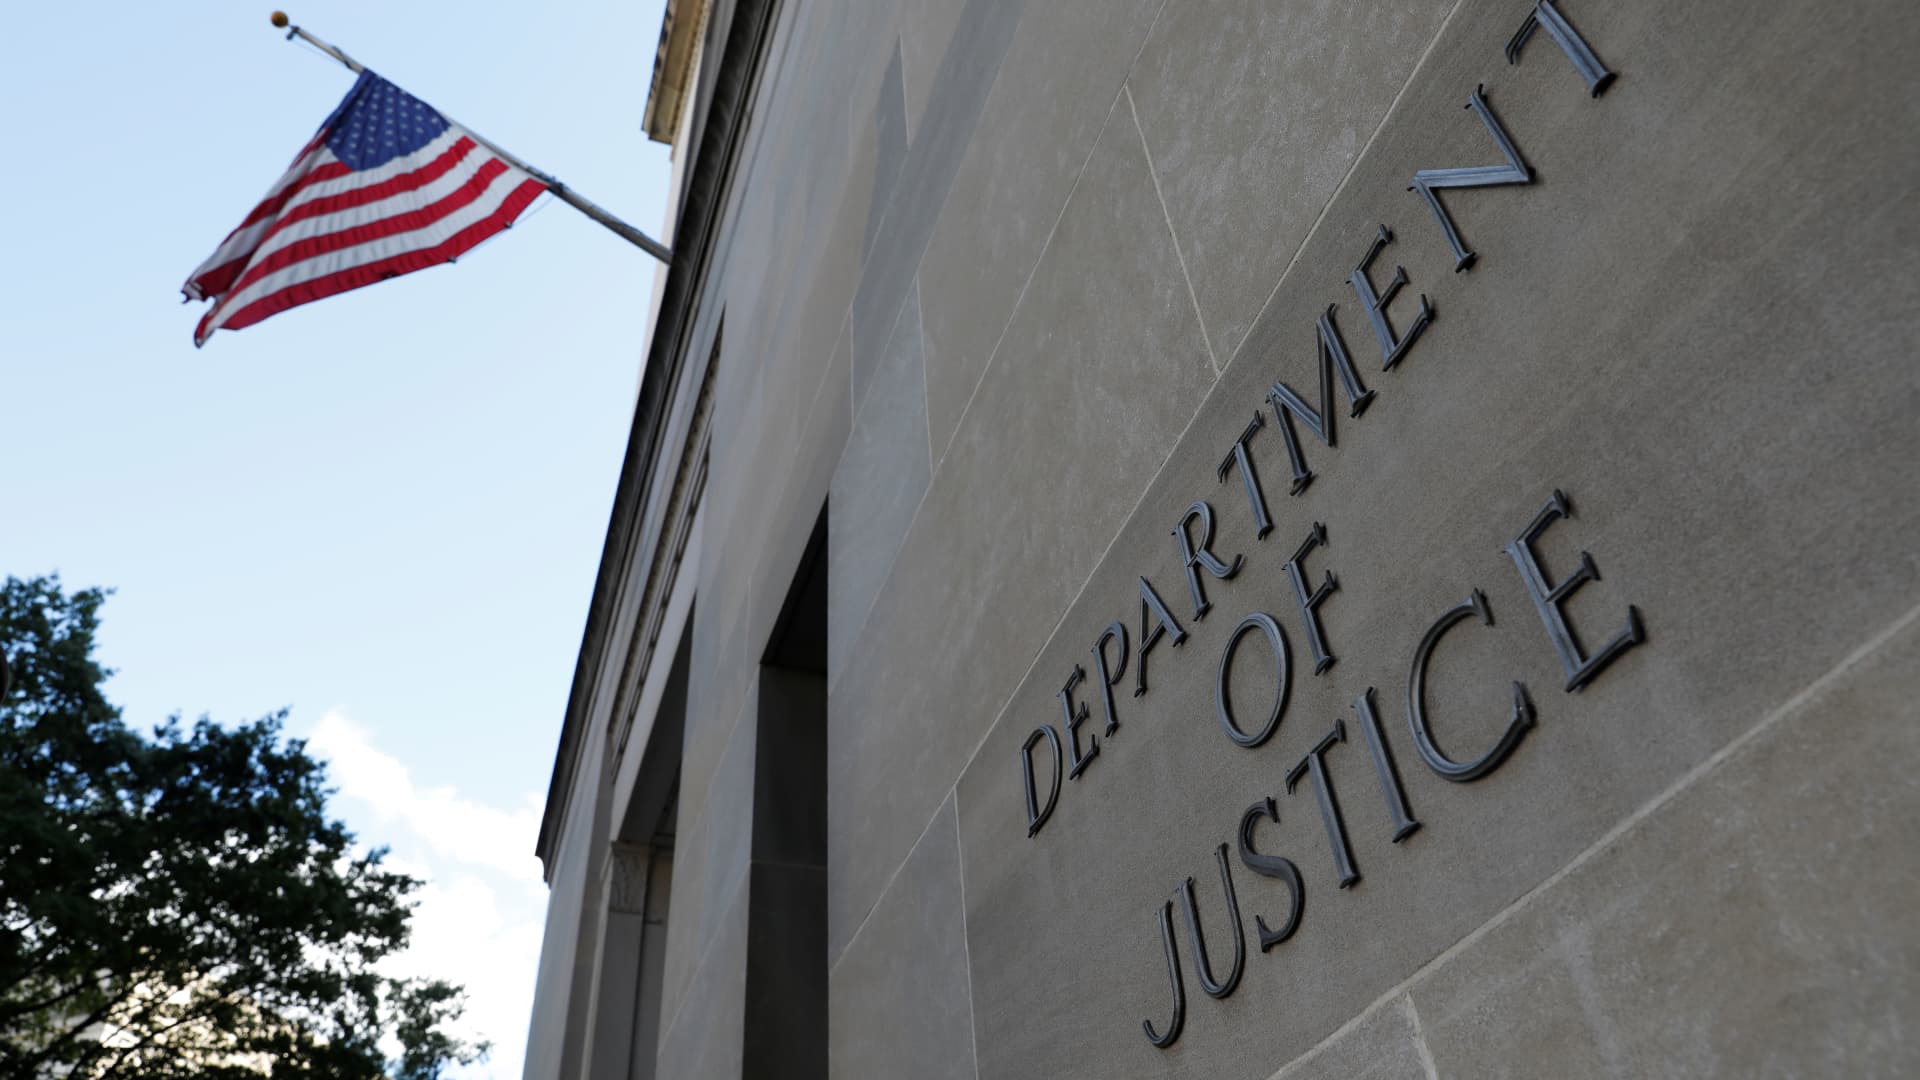 Signage is seen at the United States Department of Justice headquarters in Washington, D.C., August 29, 2020.